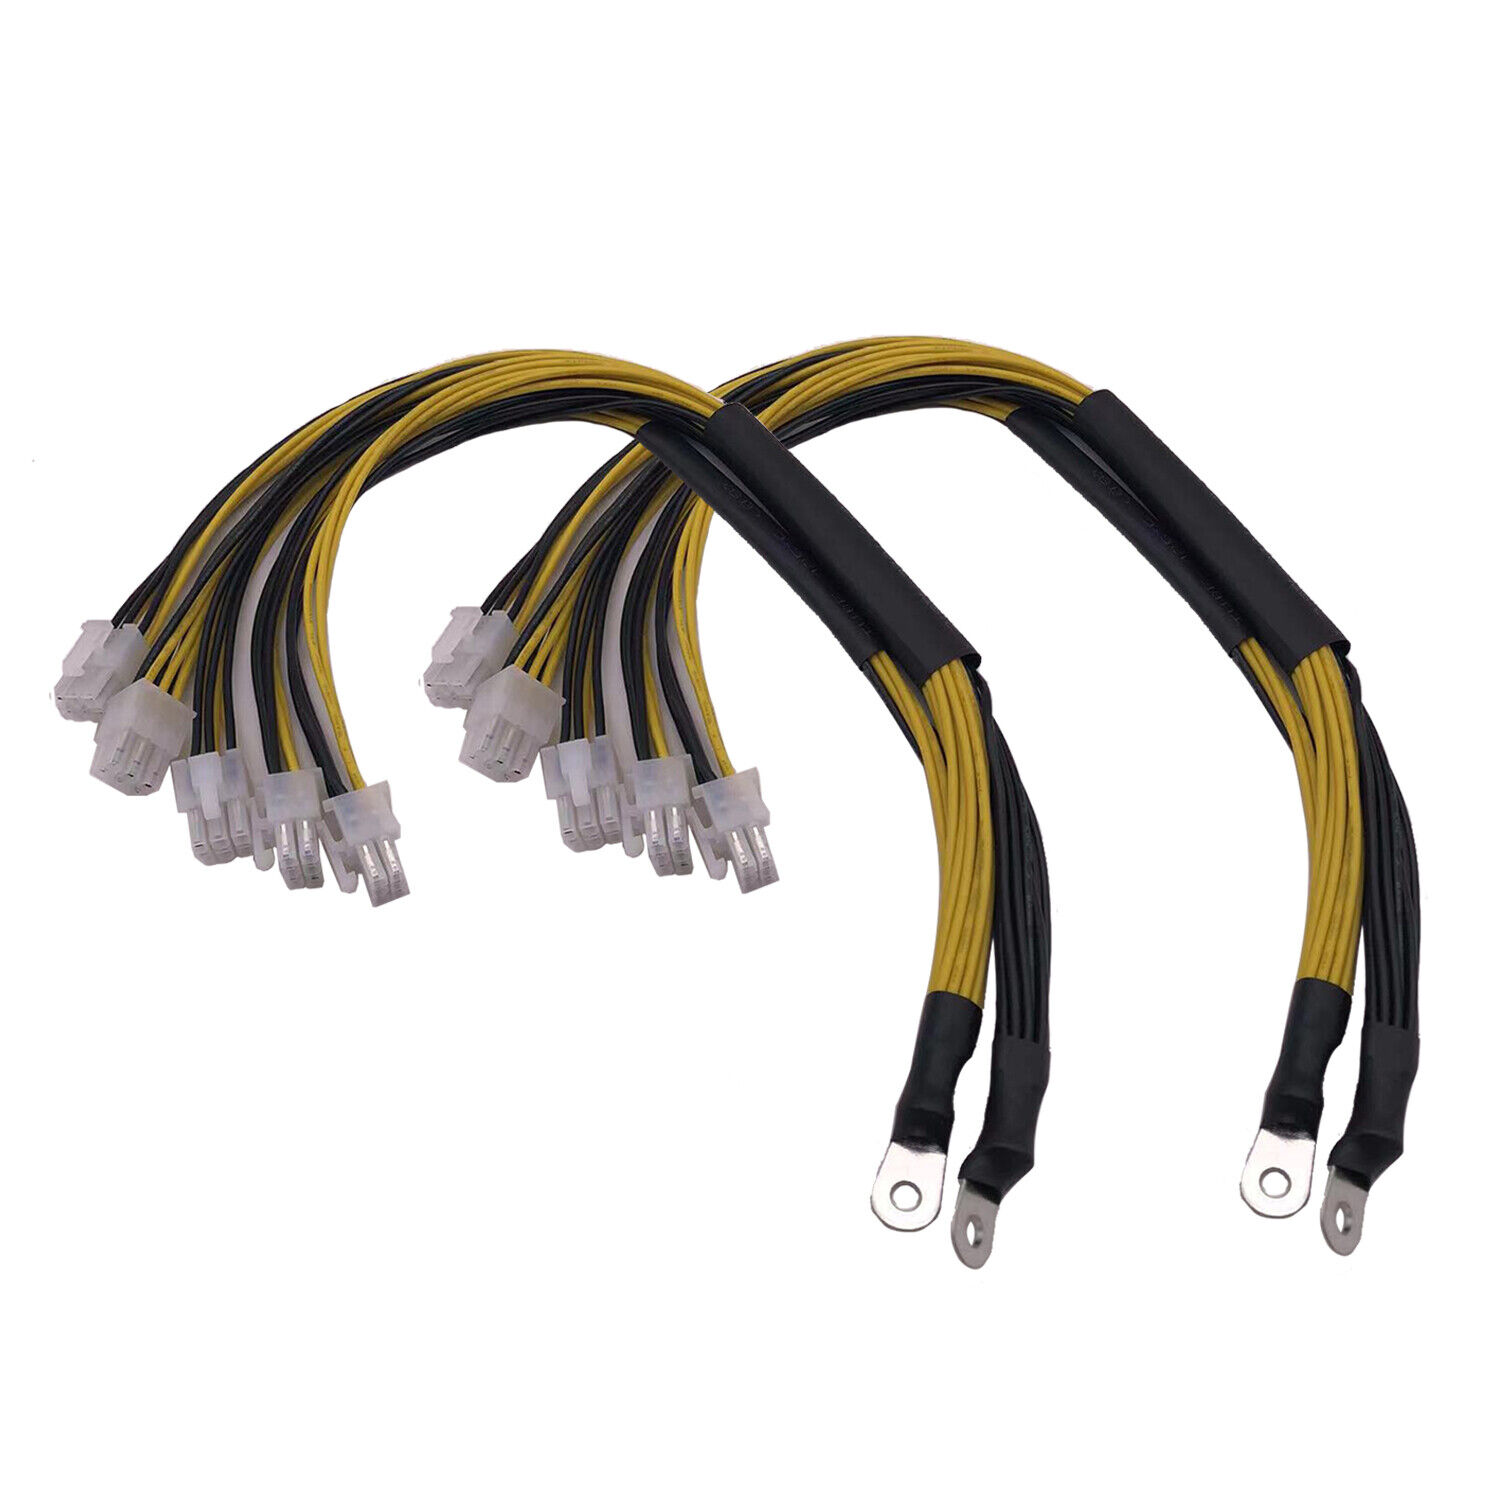 2pcs 6Pin Connector Sever Power Supply Cable for Bitmain Antminer APW3 APW7